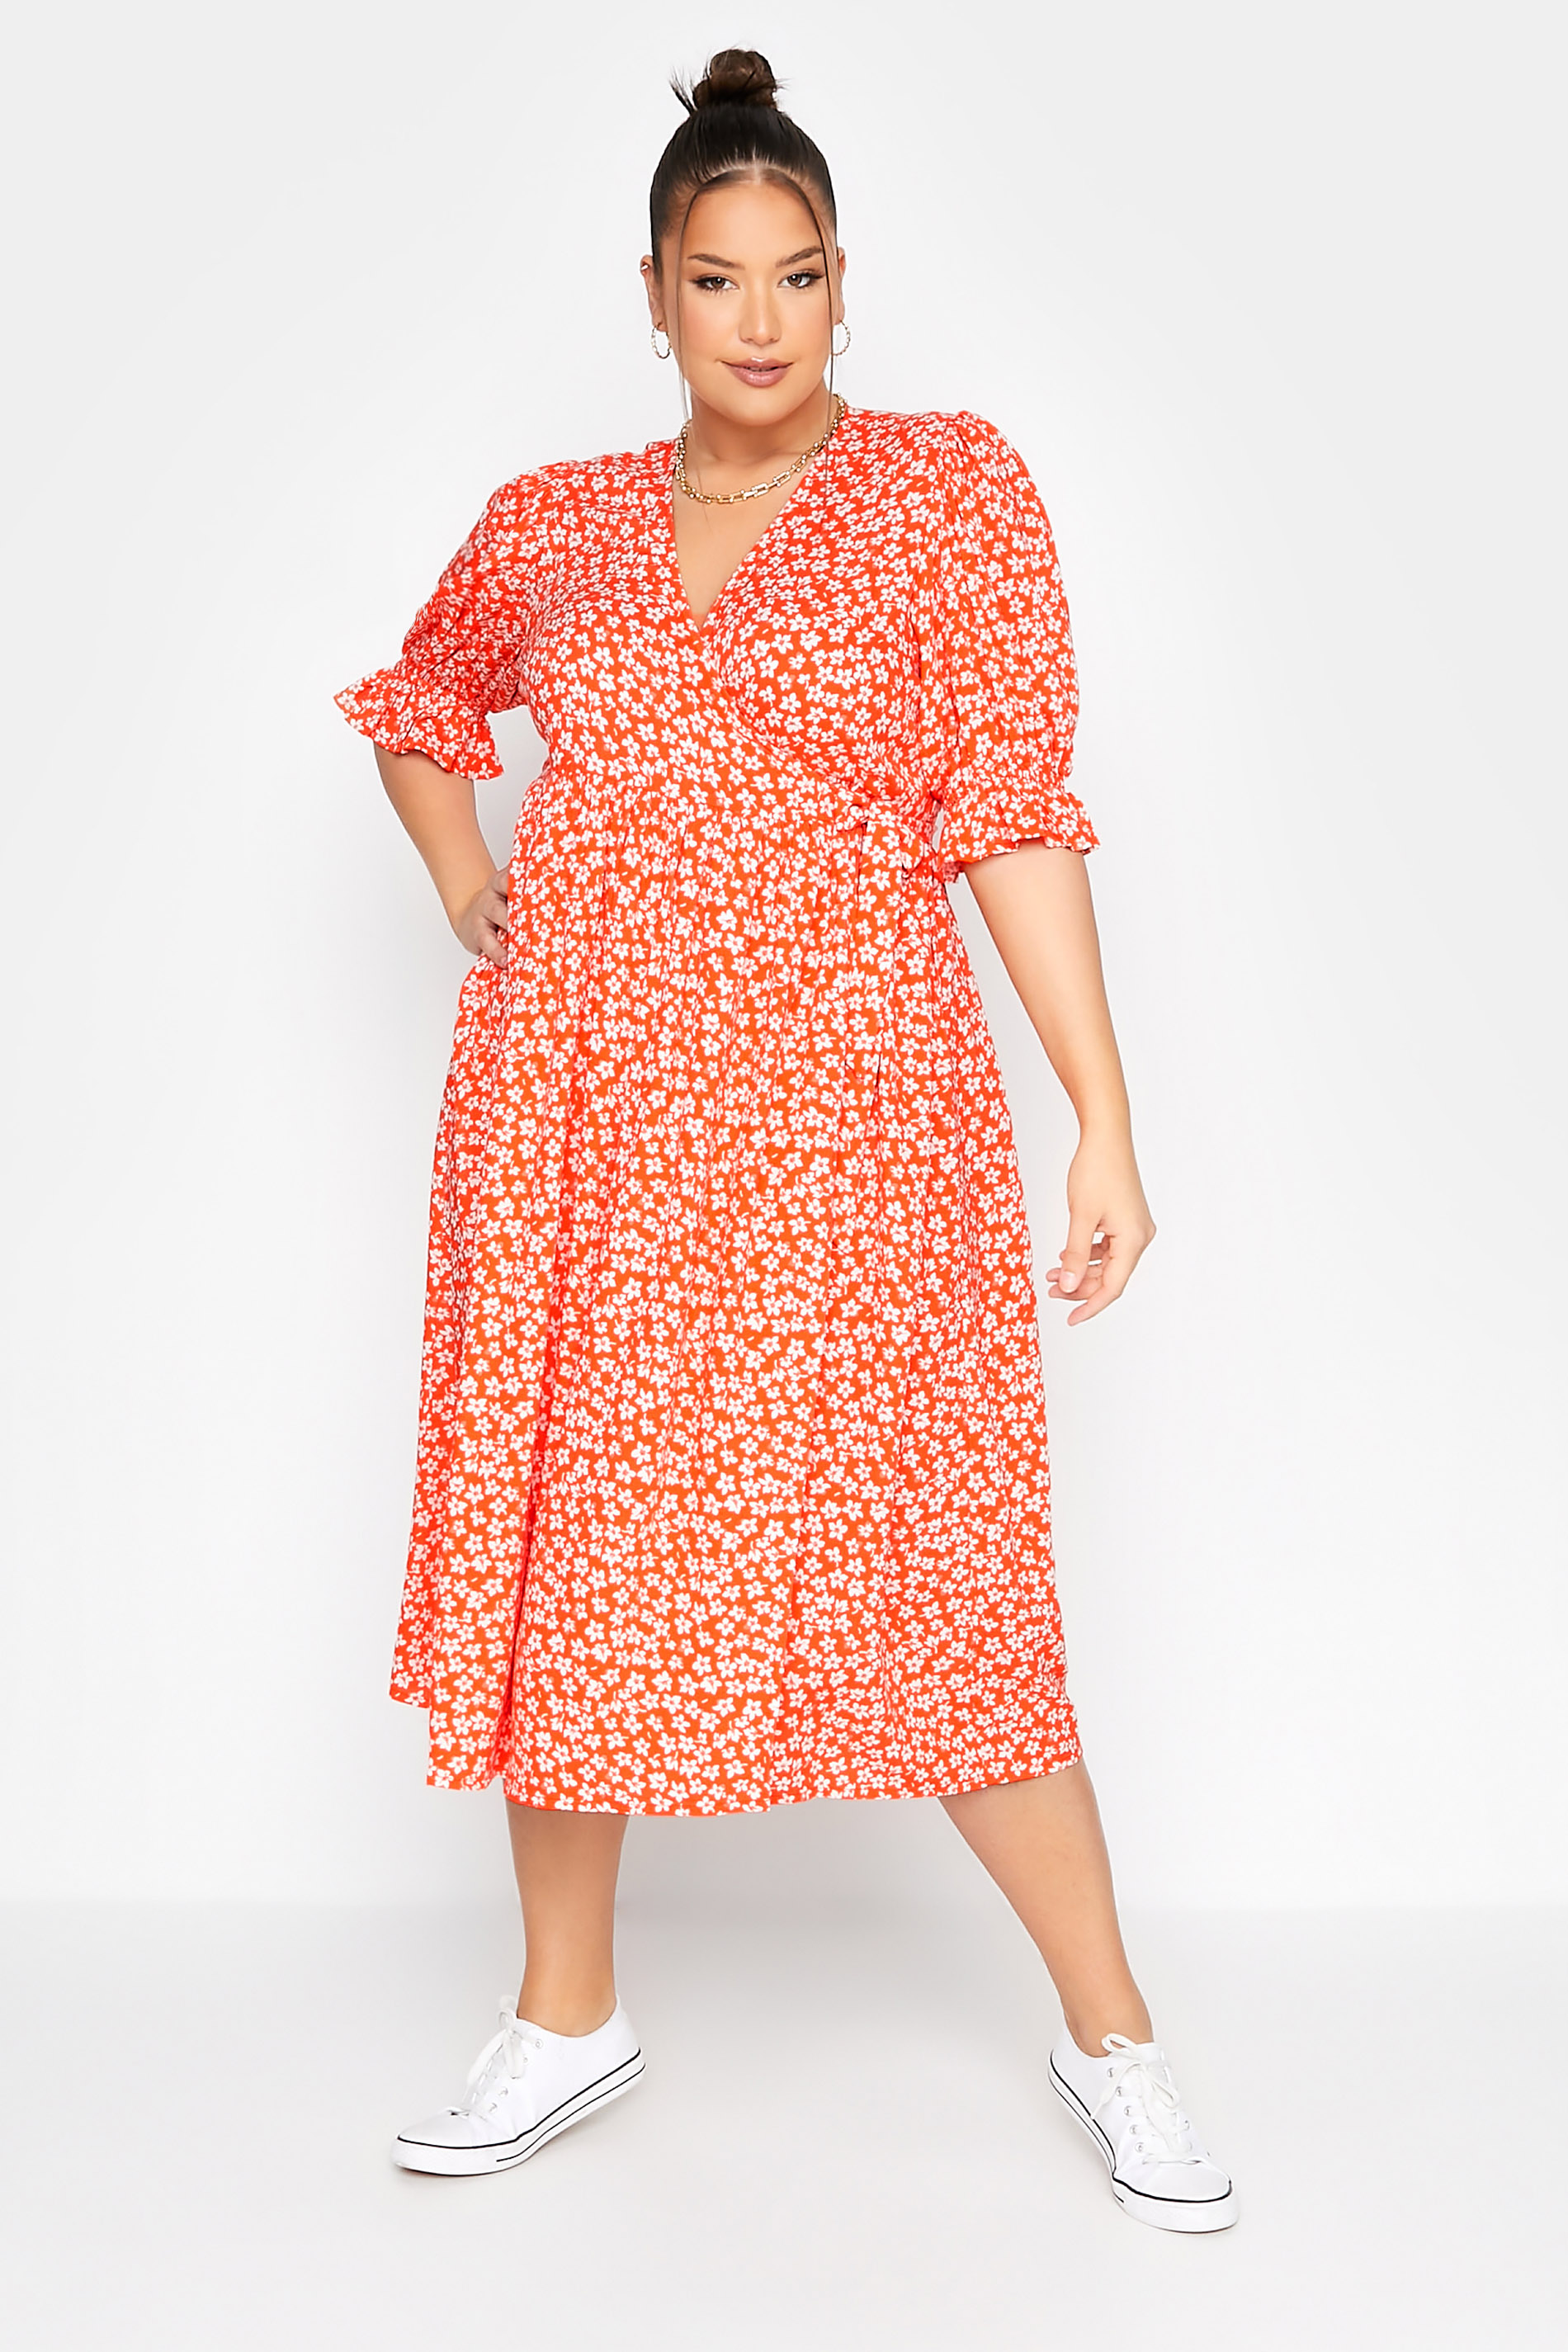 LIMITED COLLECTION Curve Orange Ditsy Wrap Dress_A.jpg